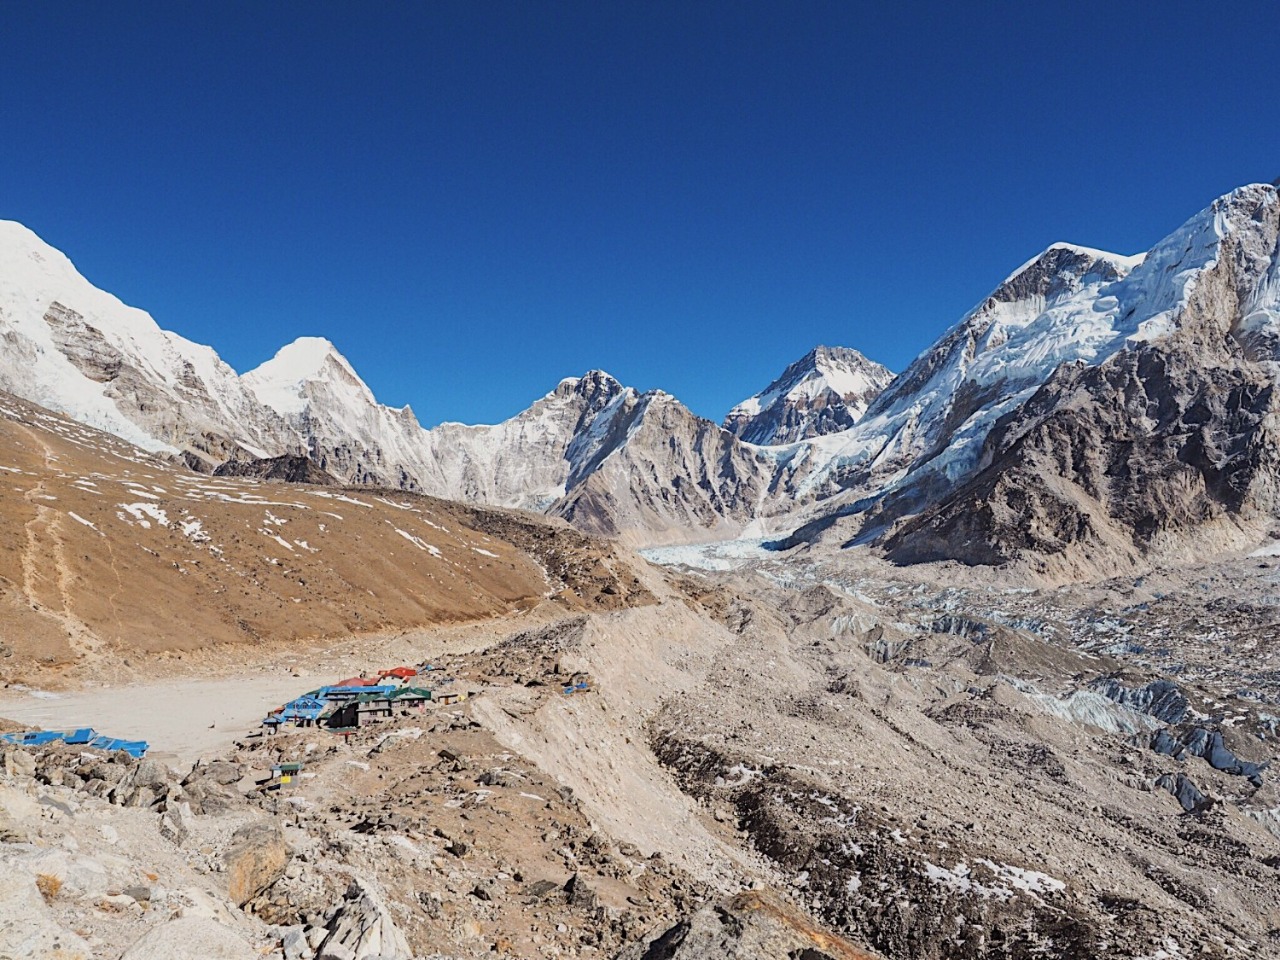 Incredible view on the Everest Base Camp Trek